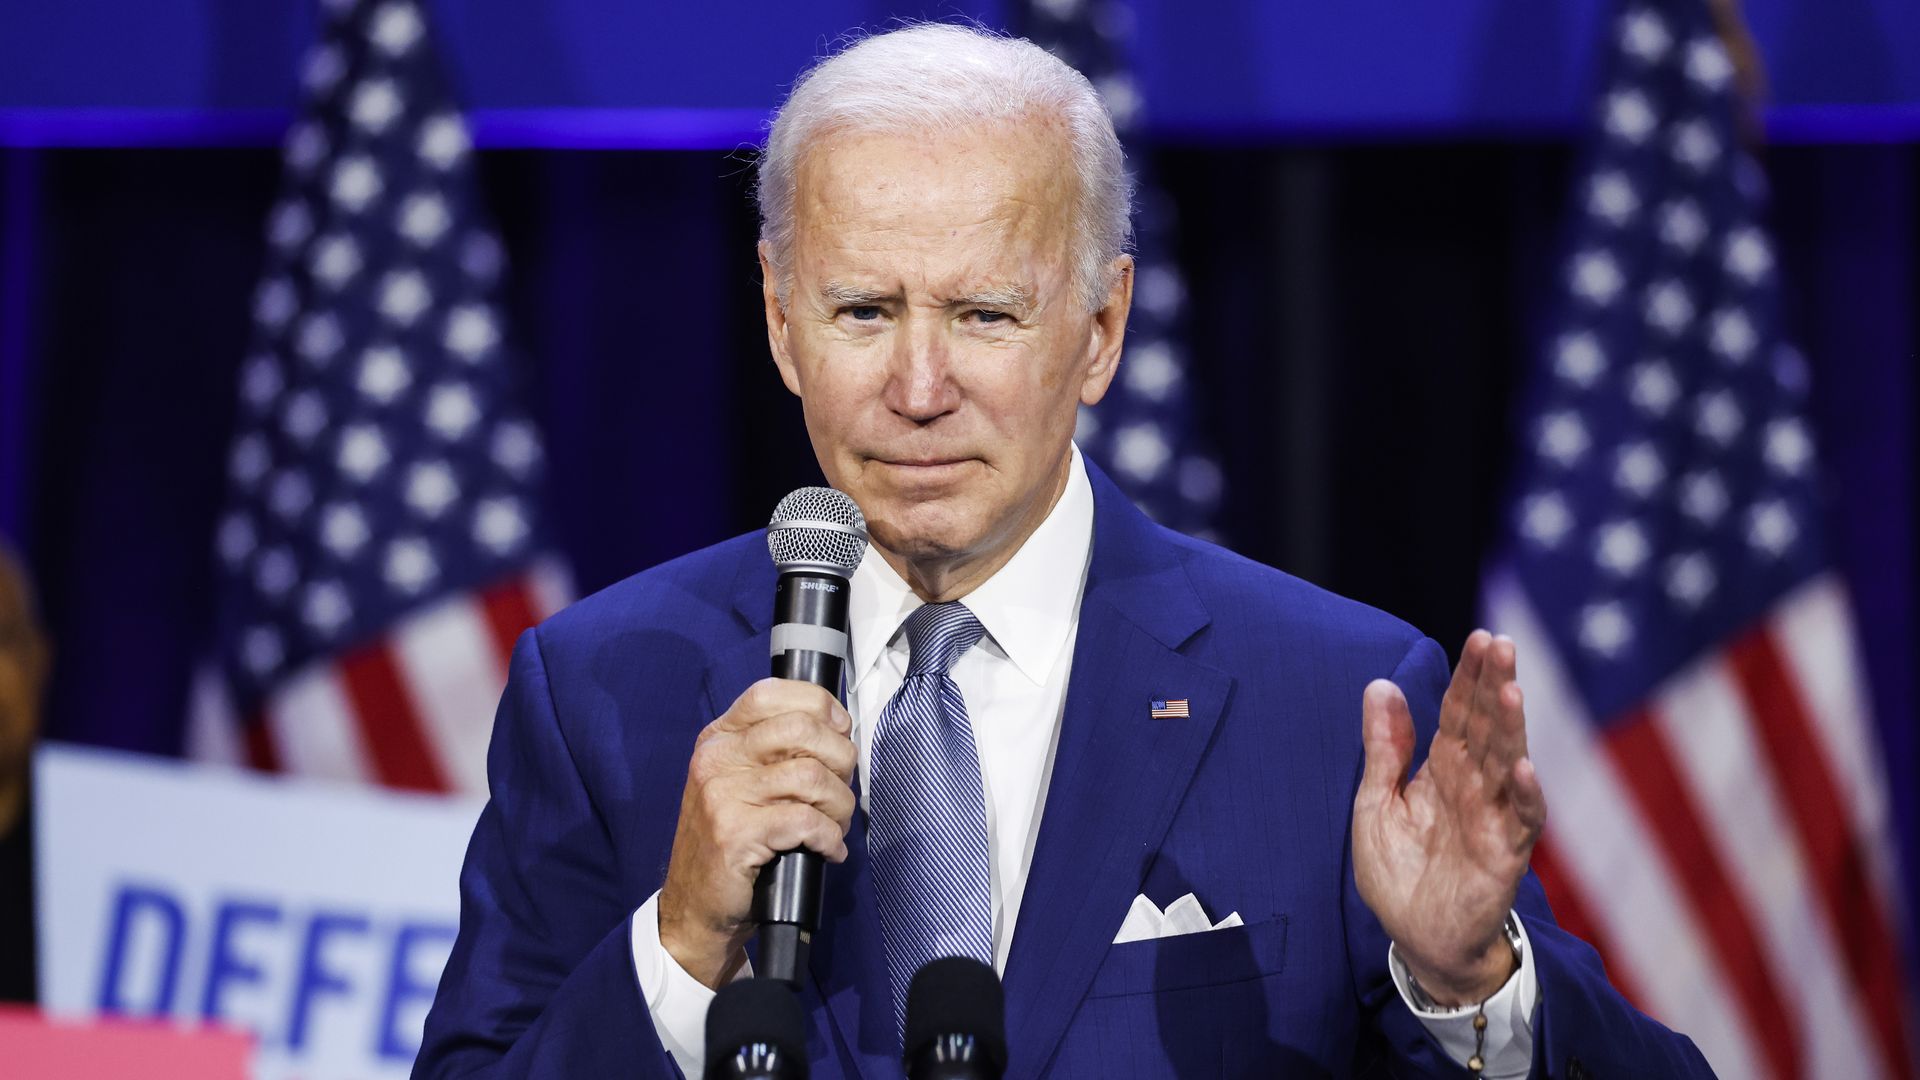 President Joe Biden speaks at a Democratic National Committee event at the Howard Theatre on October 18, 2022 in Washington, DC. 